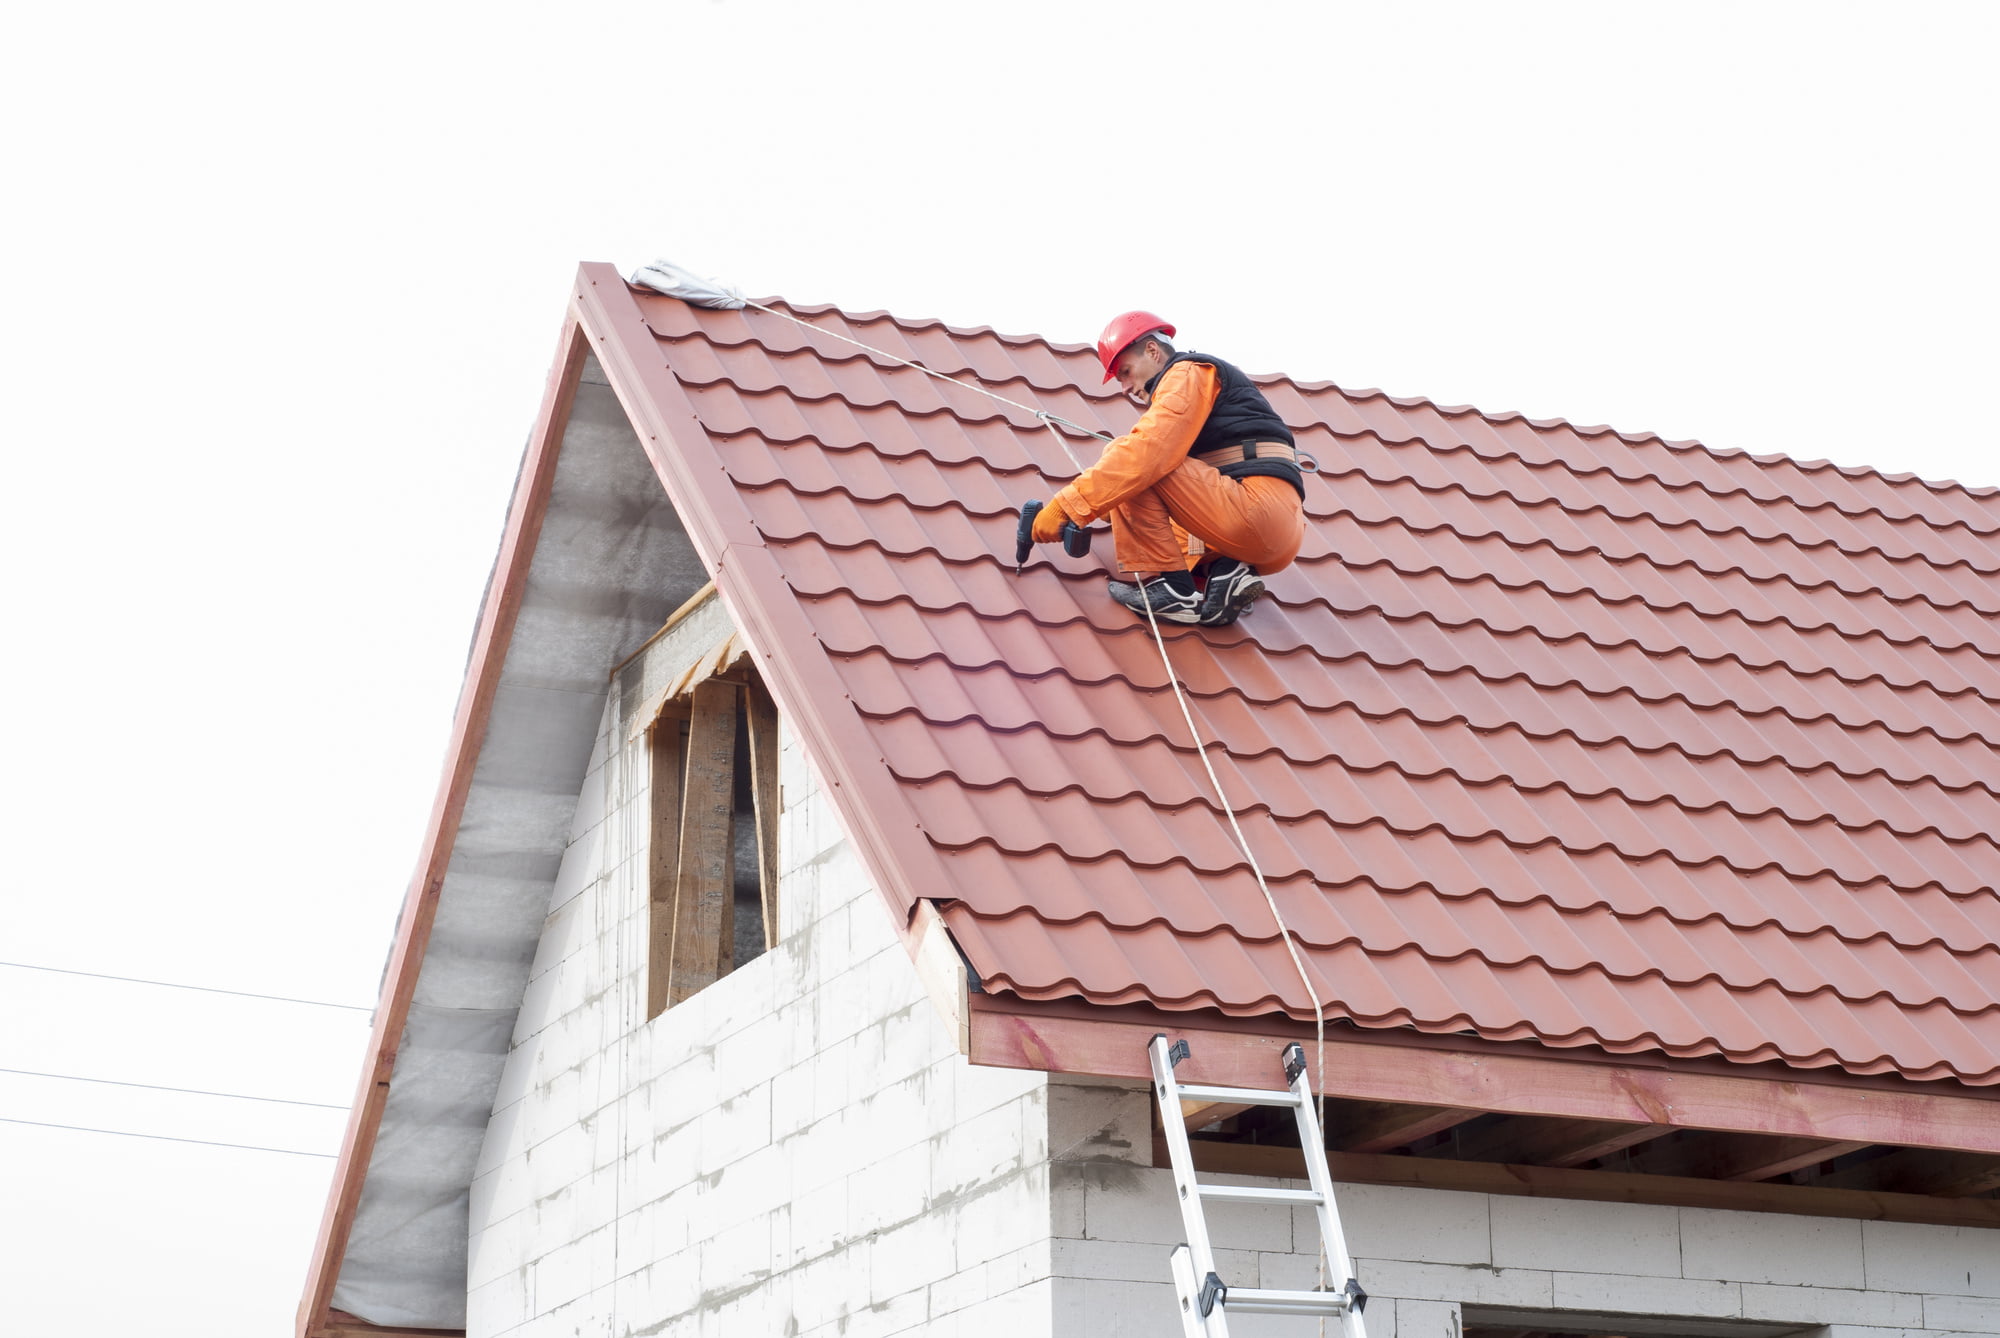 Installing a new roof for your home properly requires knowing what not to do. Here are errors with residential roof installations and how to avoid them.